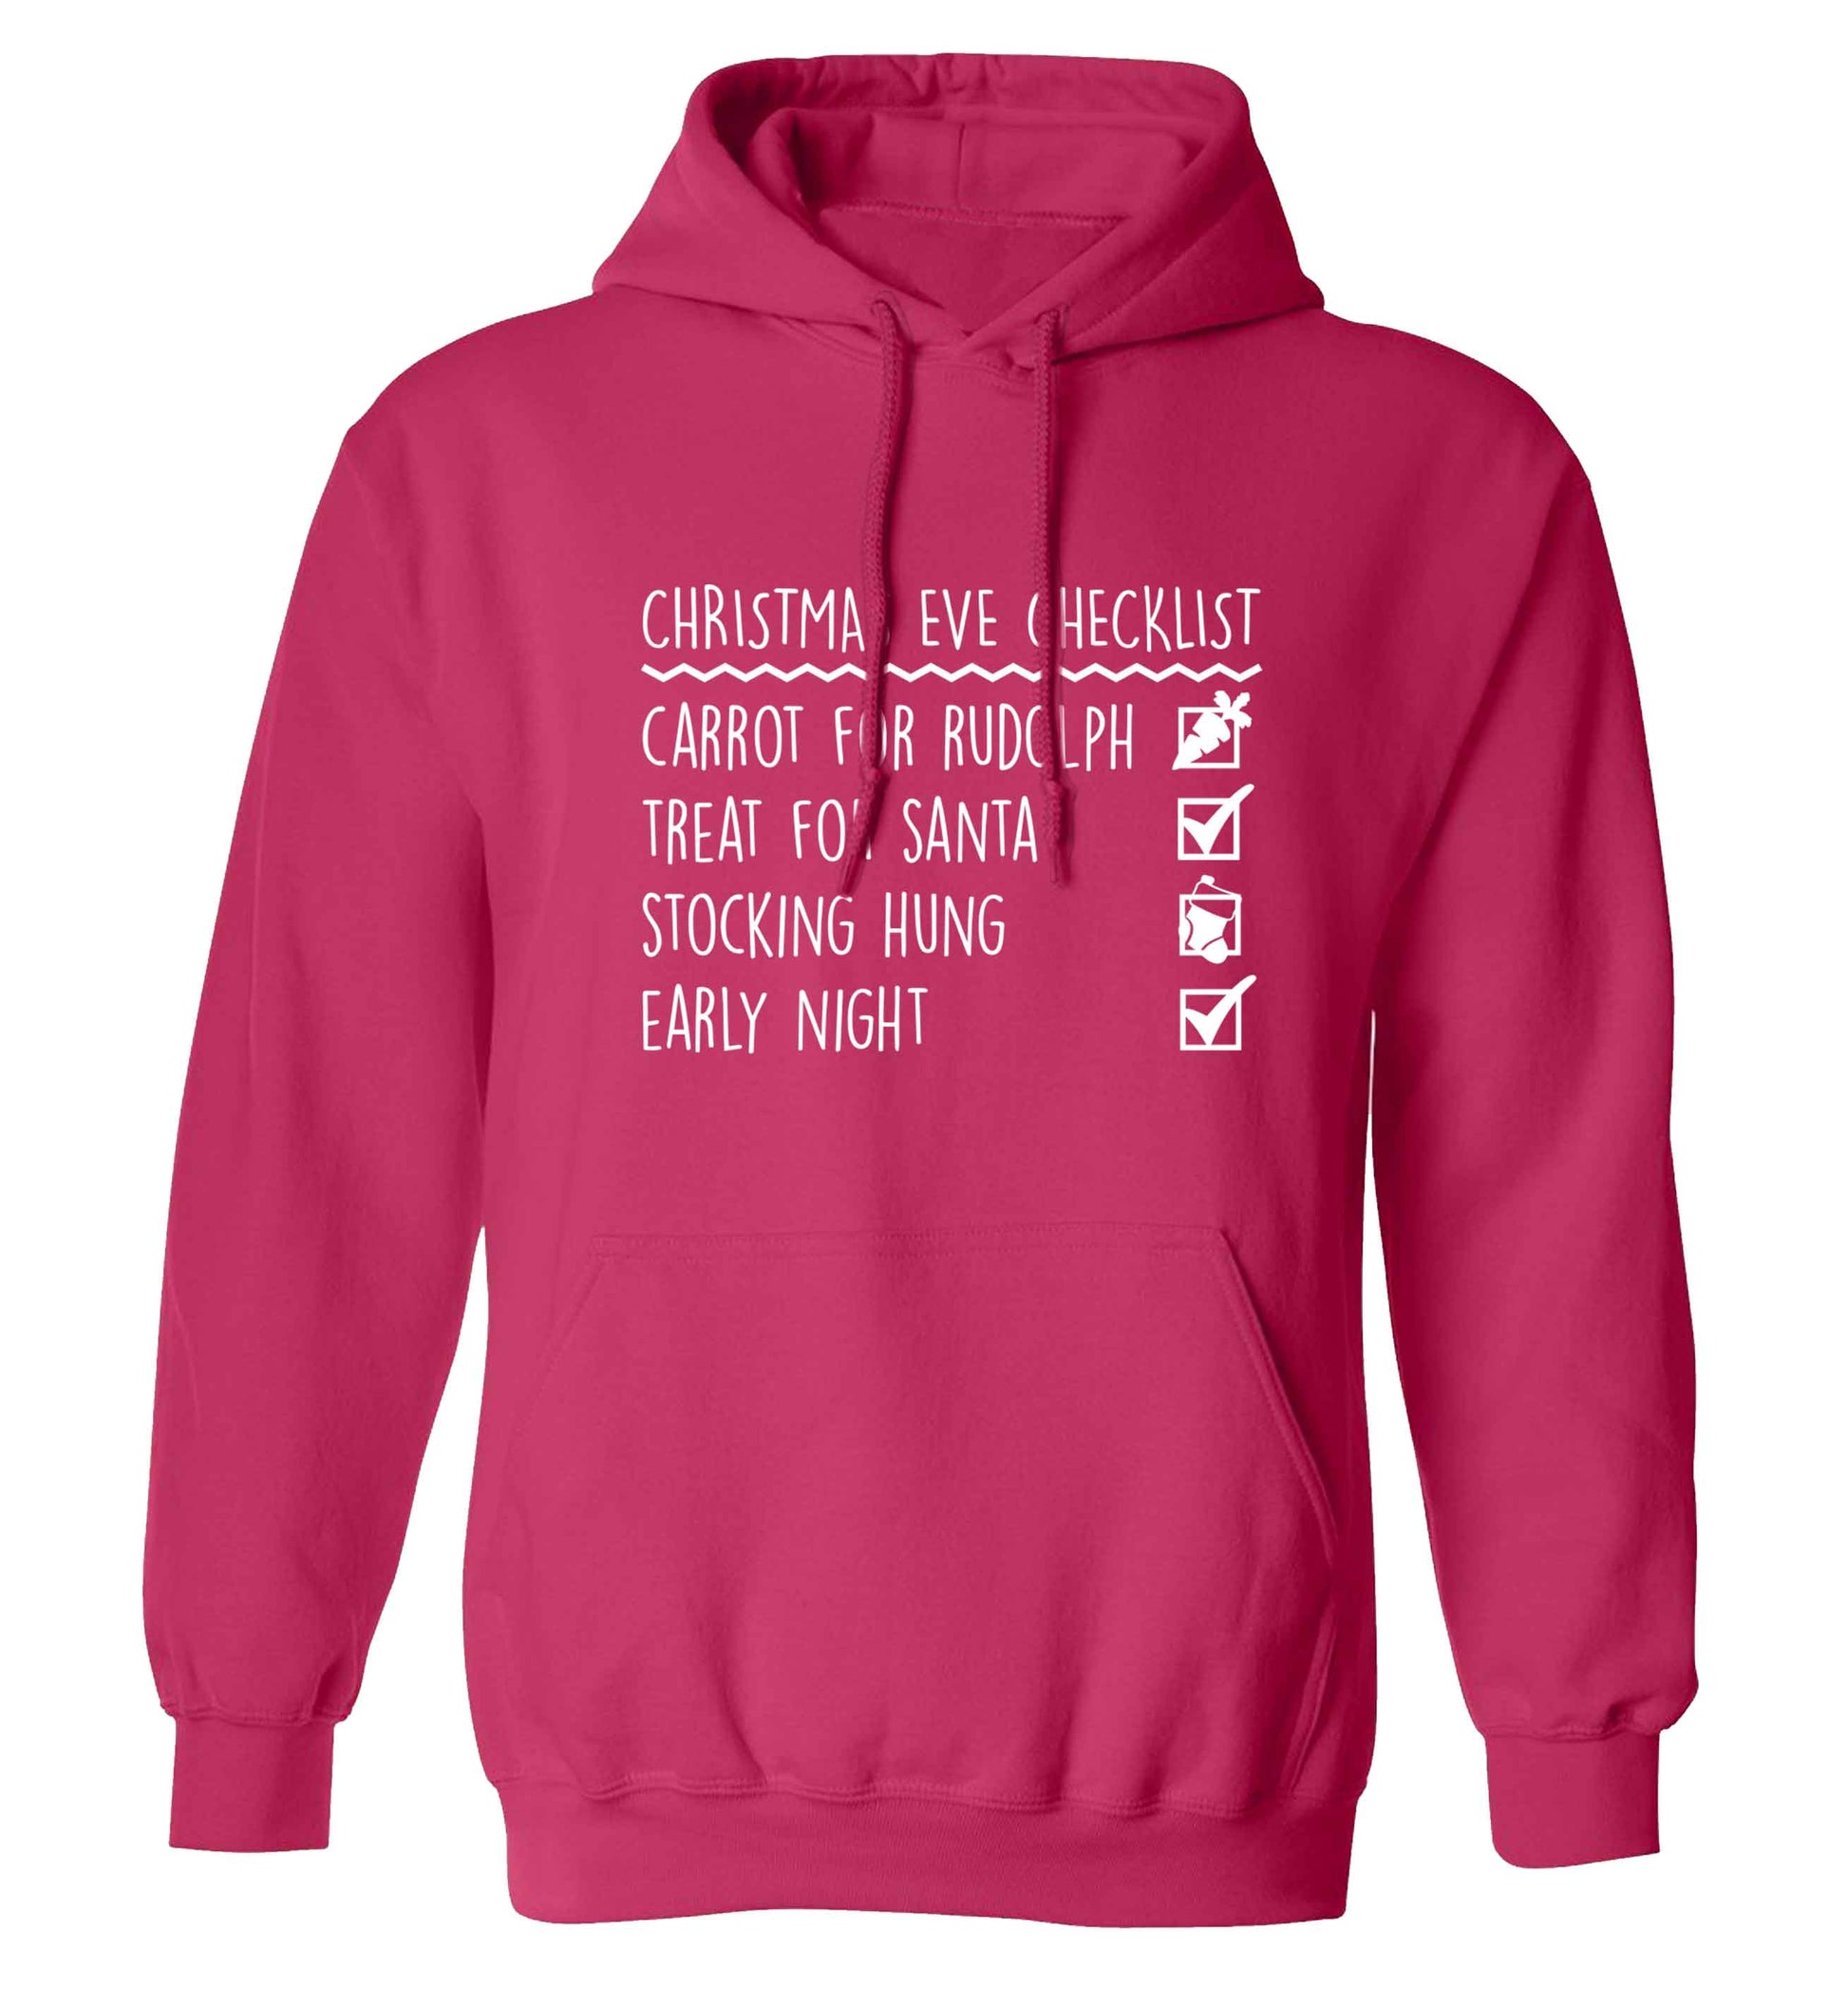 Candy Canes Candy Corns adults unisex pink hoodie 2XL